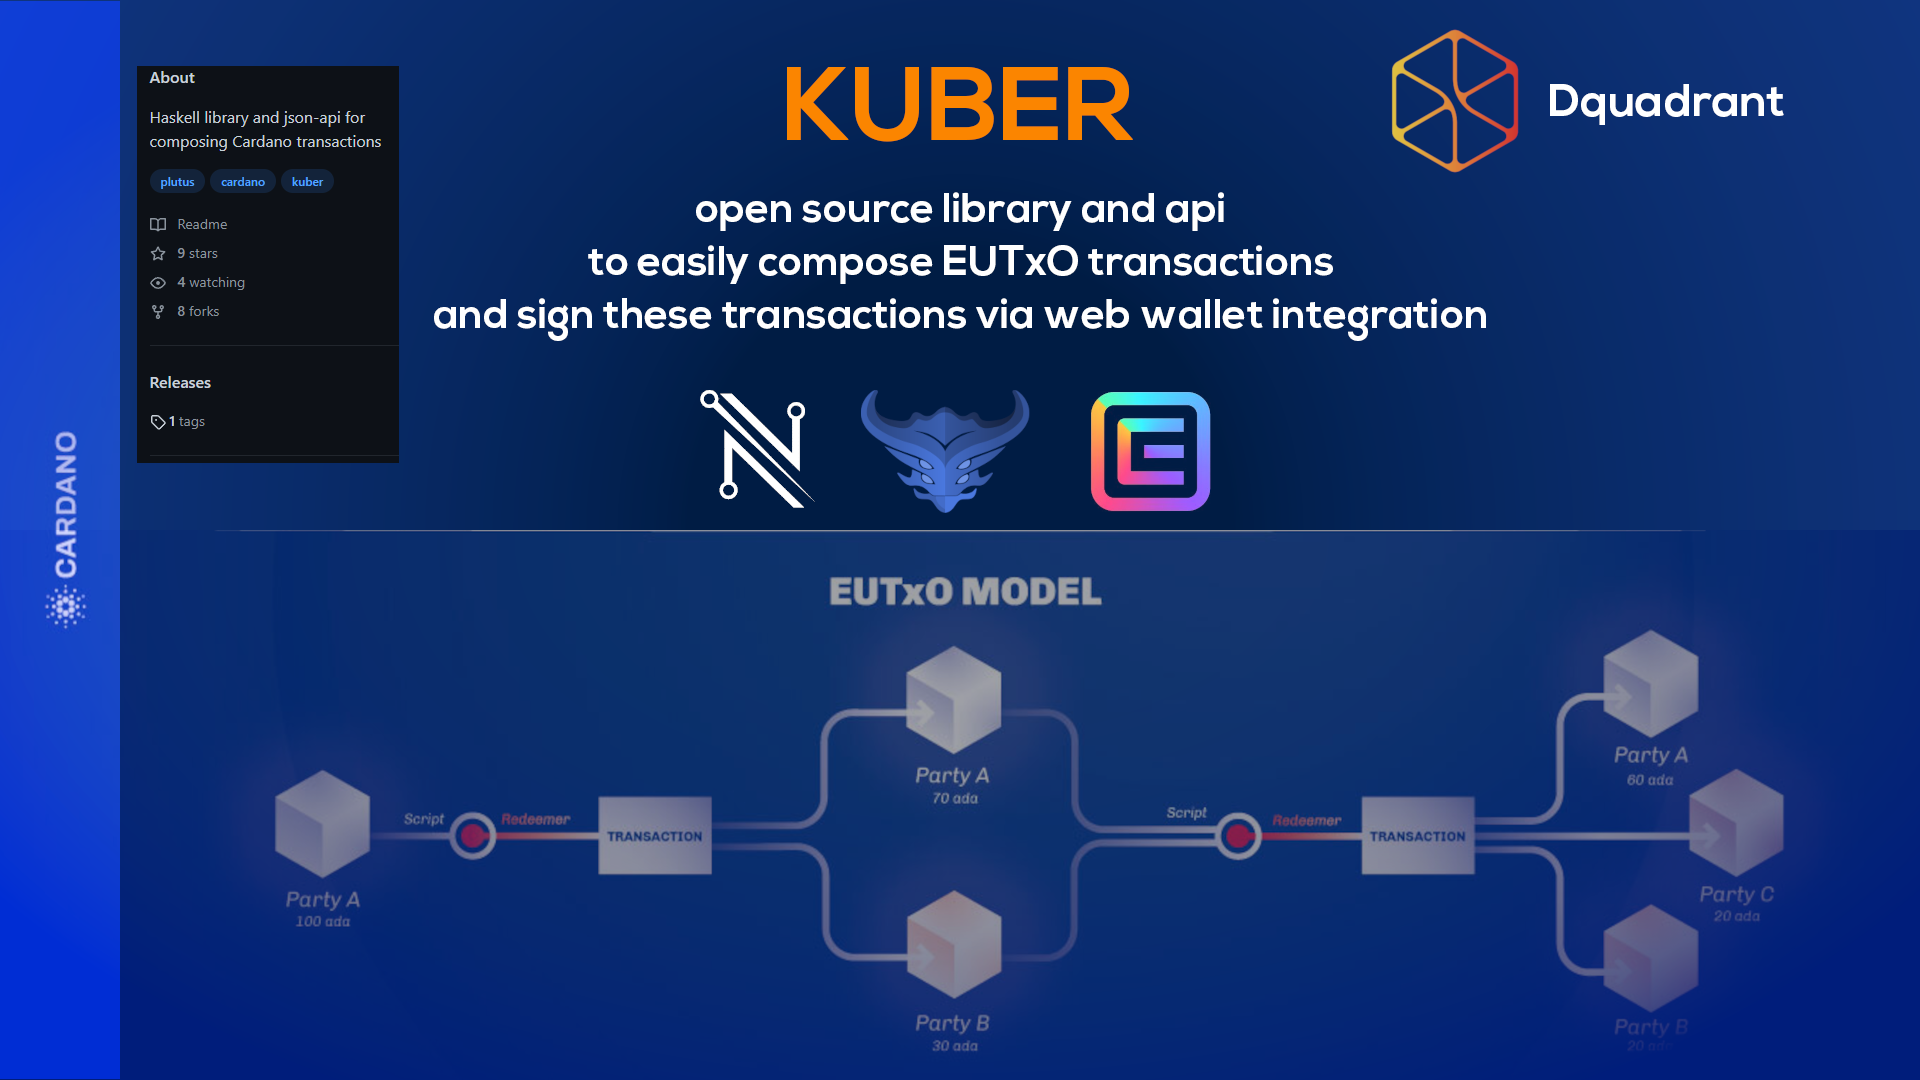 Kuber-release-2.1.0-is out